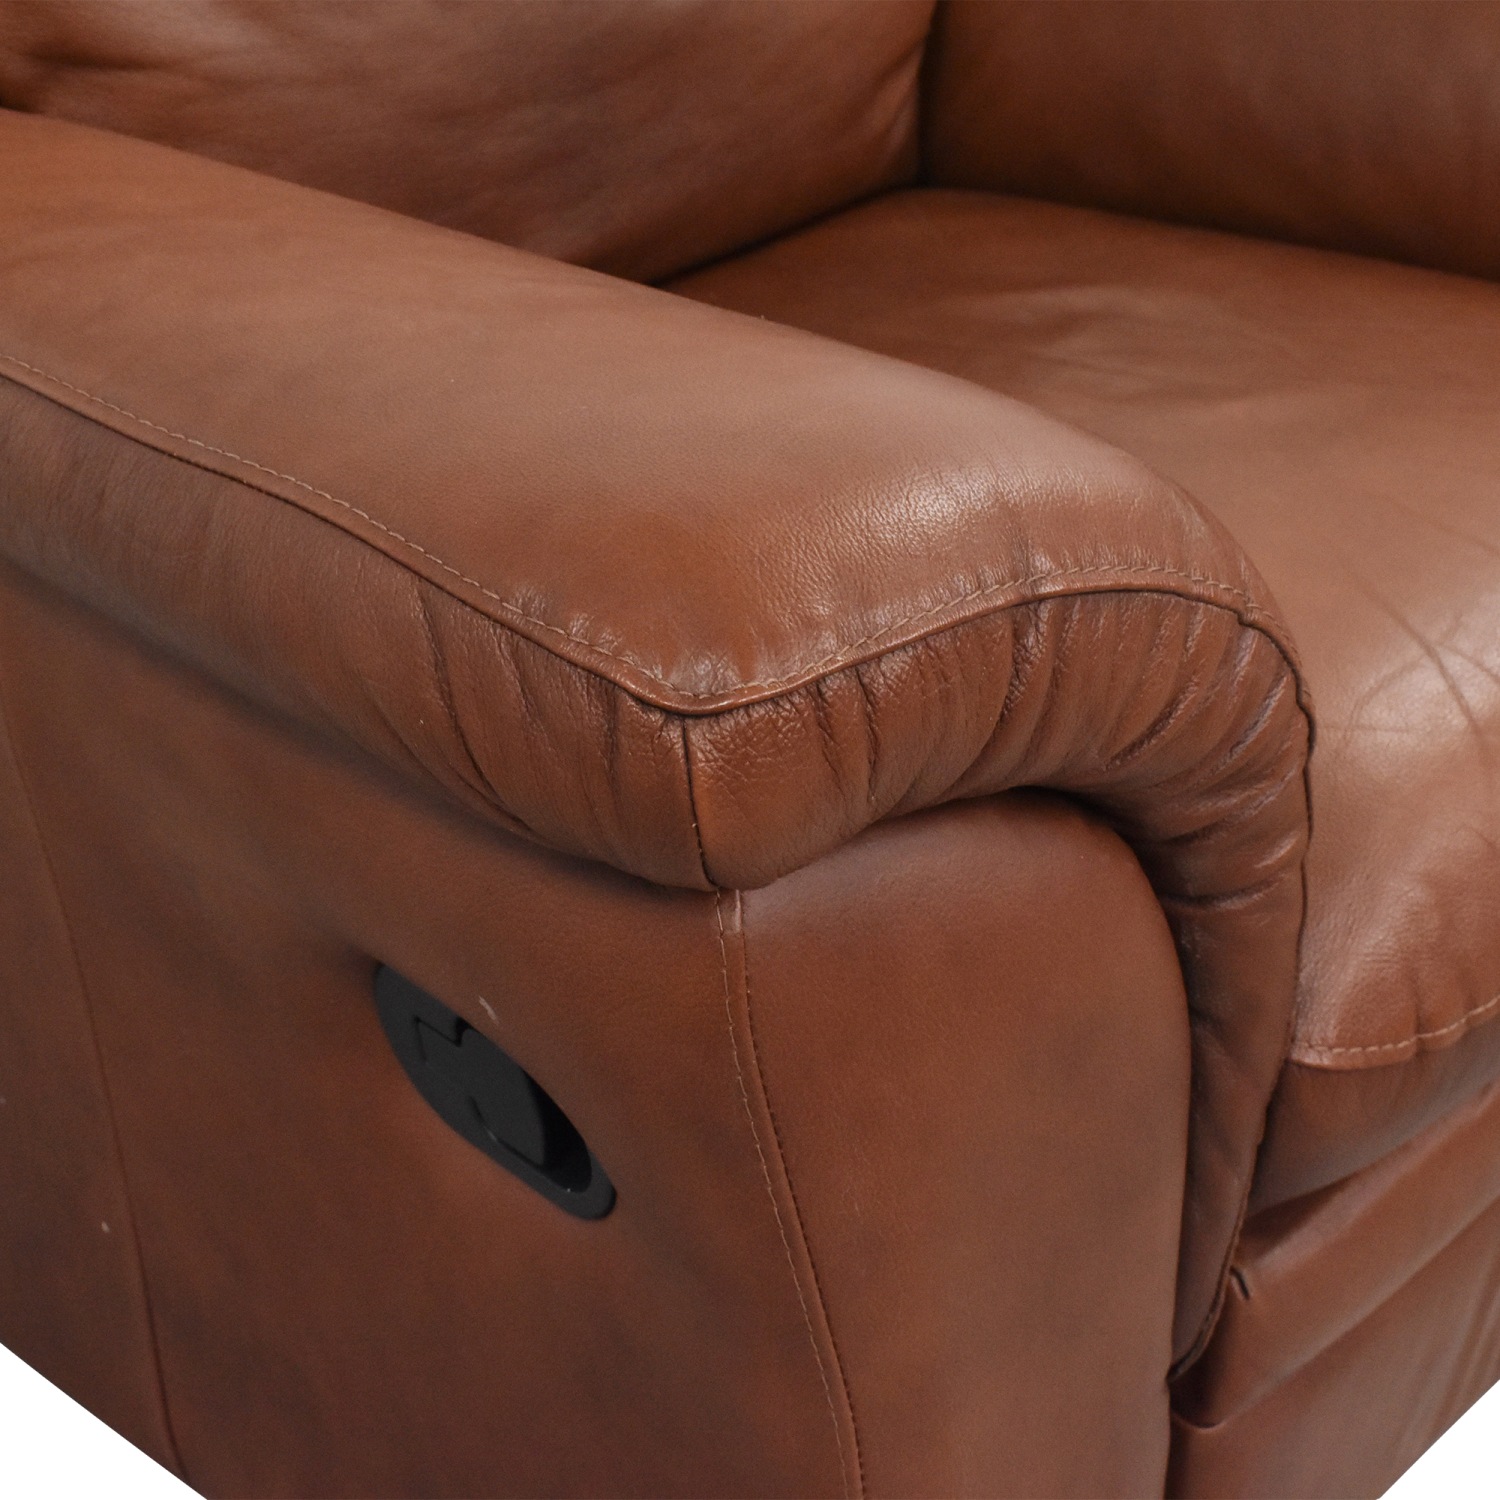 https://res.cloudinary.com/dkqtxtobb/image/upload/f_auto,q_auto:best,w_1500/product-assets/363744/chateau-dax/chairs/recliners/sell-chateau-dax-pillow-arm-recliner-chair.jpeg